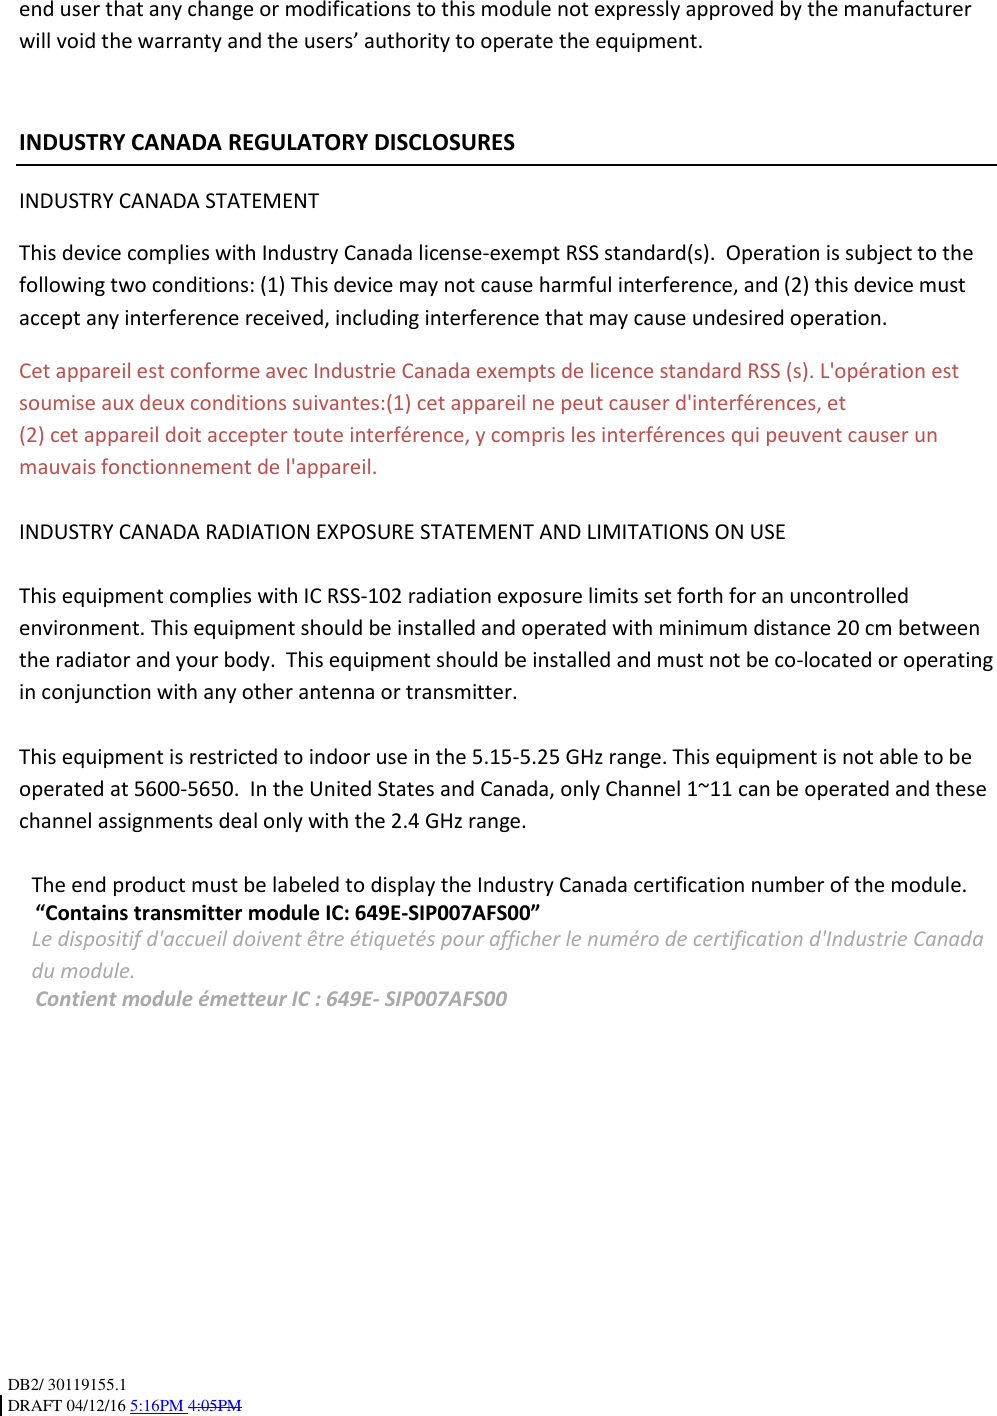 DB2/ 30119155.1 DRAFT 04/12/16 5:16PM 4:05PM   end user that any change or modifications to this module not expressly approved by the manufacturer will void the warranty and the users’ authority to operate the equipment.    INDUSTRY CANADA REGULATORY DISCLOSURES INDUSTRY CANADA STATEMENT This device complies with Industry Canada license-exempt RSS standard(s).  Operation is subject to the following two conditions: (1) This device may not cause harmful interference, and (2) this device must accept any interference received, including interference that may cause undesired operation. Cet appareil est conforme avec Industrie Canada exempts de licence standard RSS (s). L&apos;opération est soumise aux deux conditions suivantes:(1) cet appareil ne peut causer d&apos;interférences, et (2) cet appareil doit accepter toute interférence, y compris les interférences qui peuvent causer un mauvais fonctionnement de l&apos;appareil.  INDUSTRY CANADA RADIATION EXPOSURE STATEMENT AND LIMITATIONS ON USE  This equipment complies with IC RSS-102 radiation exposure limits set forth for an uncontrolled environment. This equipment should be installed and operated with minimum distance 20 cm between the radiator and your body.  This equipment should be installed and must not be co-located or operating in conjunction with any other antenna or transmitter.  This equipment is restricted to indoor use in the 5.15-5.25 GHz range. This equipment is not able to be operated at 5600-5650.  In the United States and Canada, only Channel 1~11 can be operated and these channel assignments deal only with the 2.4 GHz range.   The end product must be labeled to display the Industry Canada certification number of the module. “Contains transmitter module IC: 649E-SIP007AFS00” Le dispositif d&apos;accueil doivent être étiquetés pour afficher le numéro de certification d&apos;Industrie Canada du module. Contient module émetteur IC : 649E- SIP007AFS00           